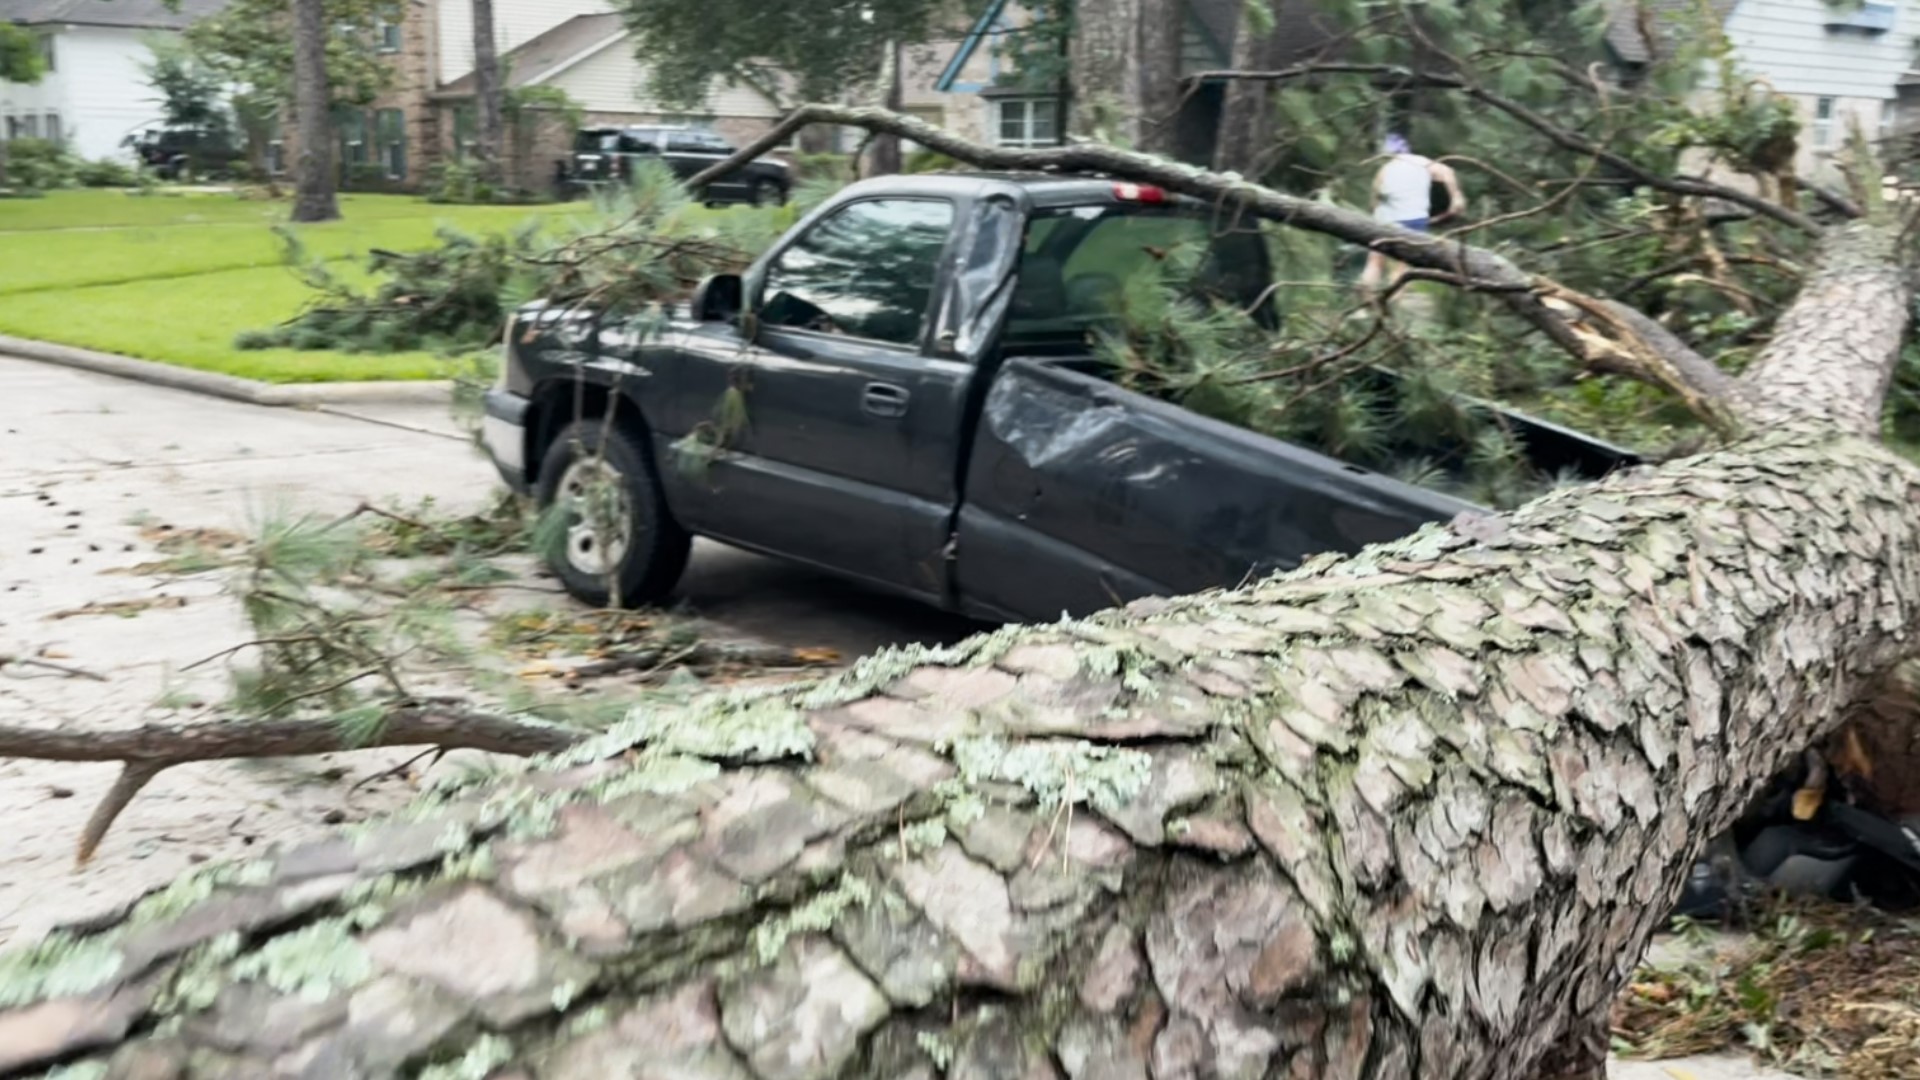 KHOU 11 Photojournalist Scott McKenney shared video of a large tree that had been uprooted near Spring and crushed a truck.